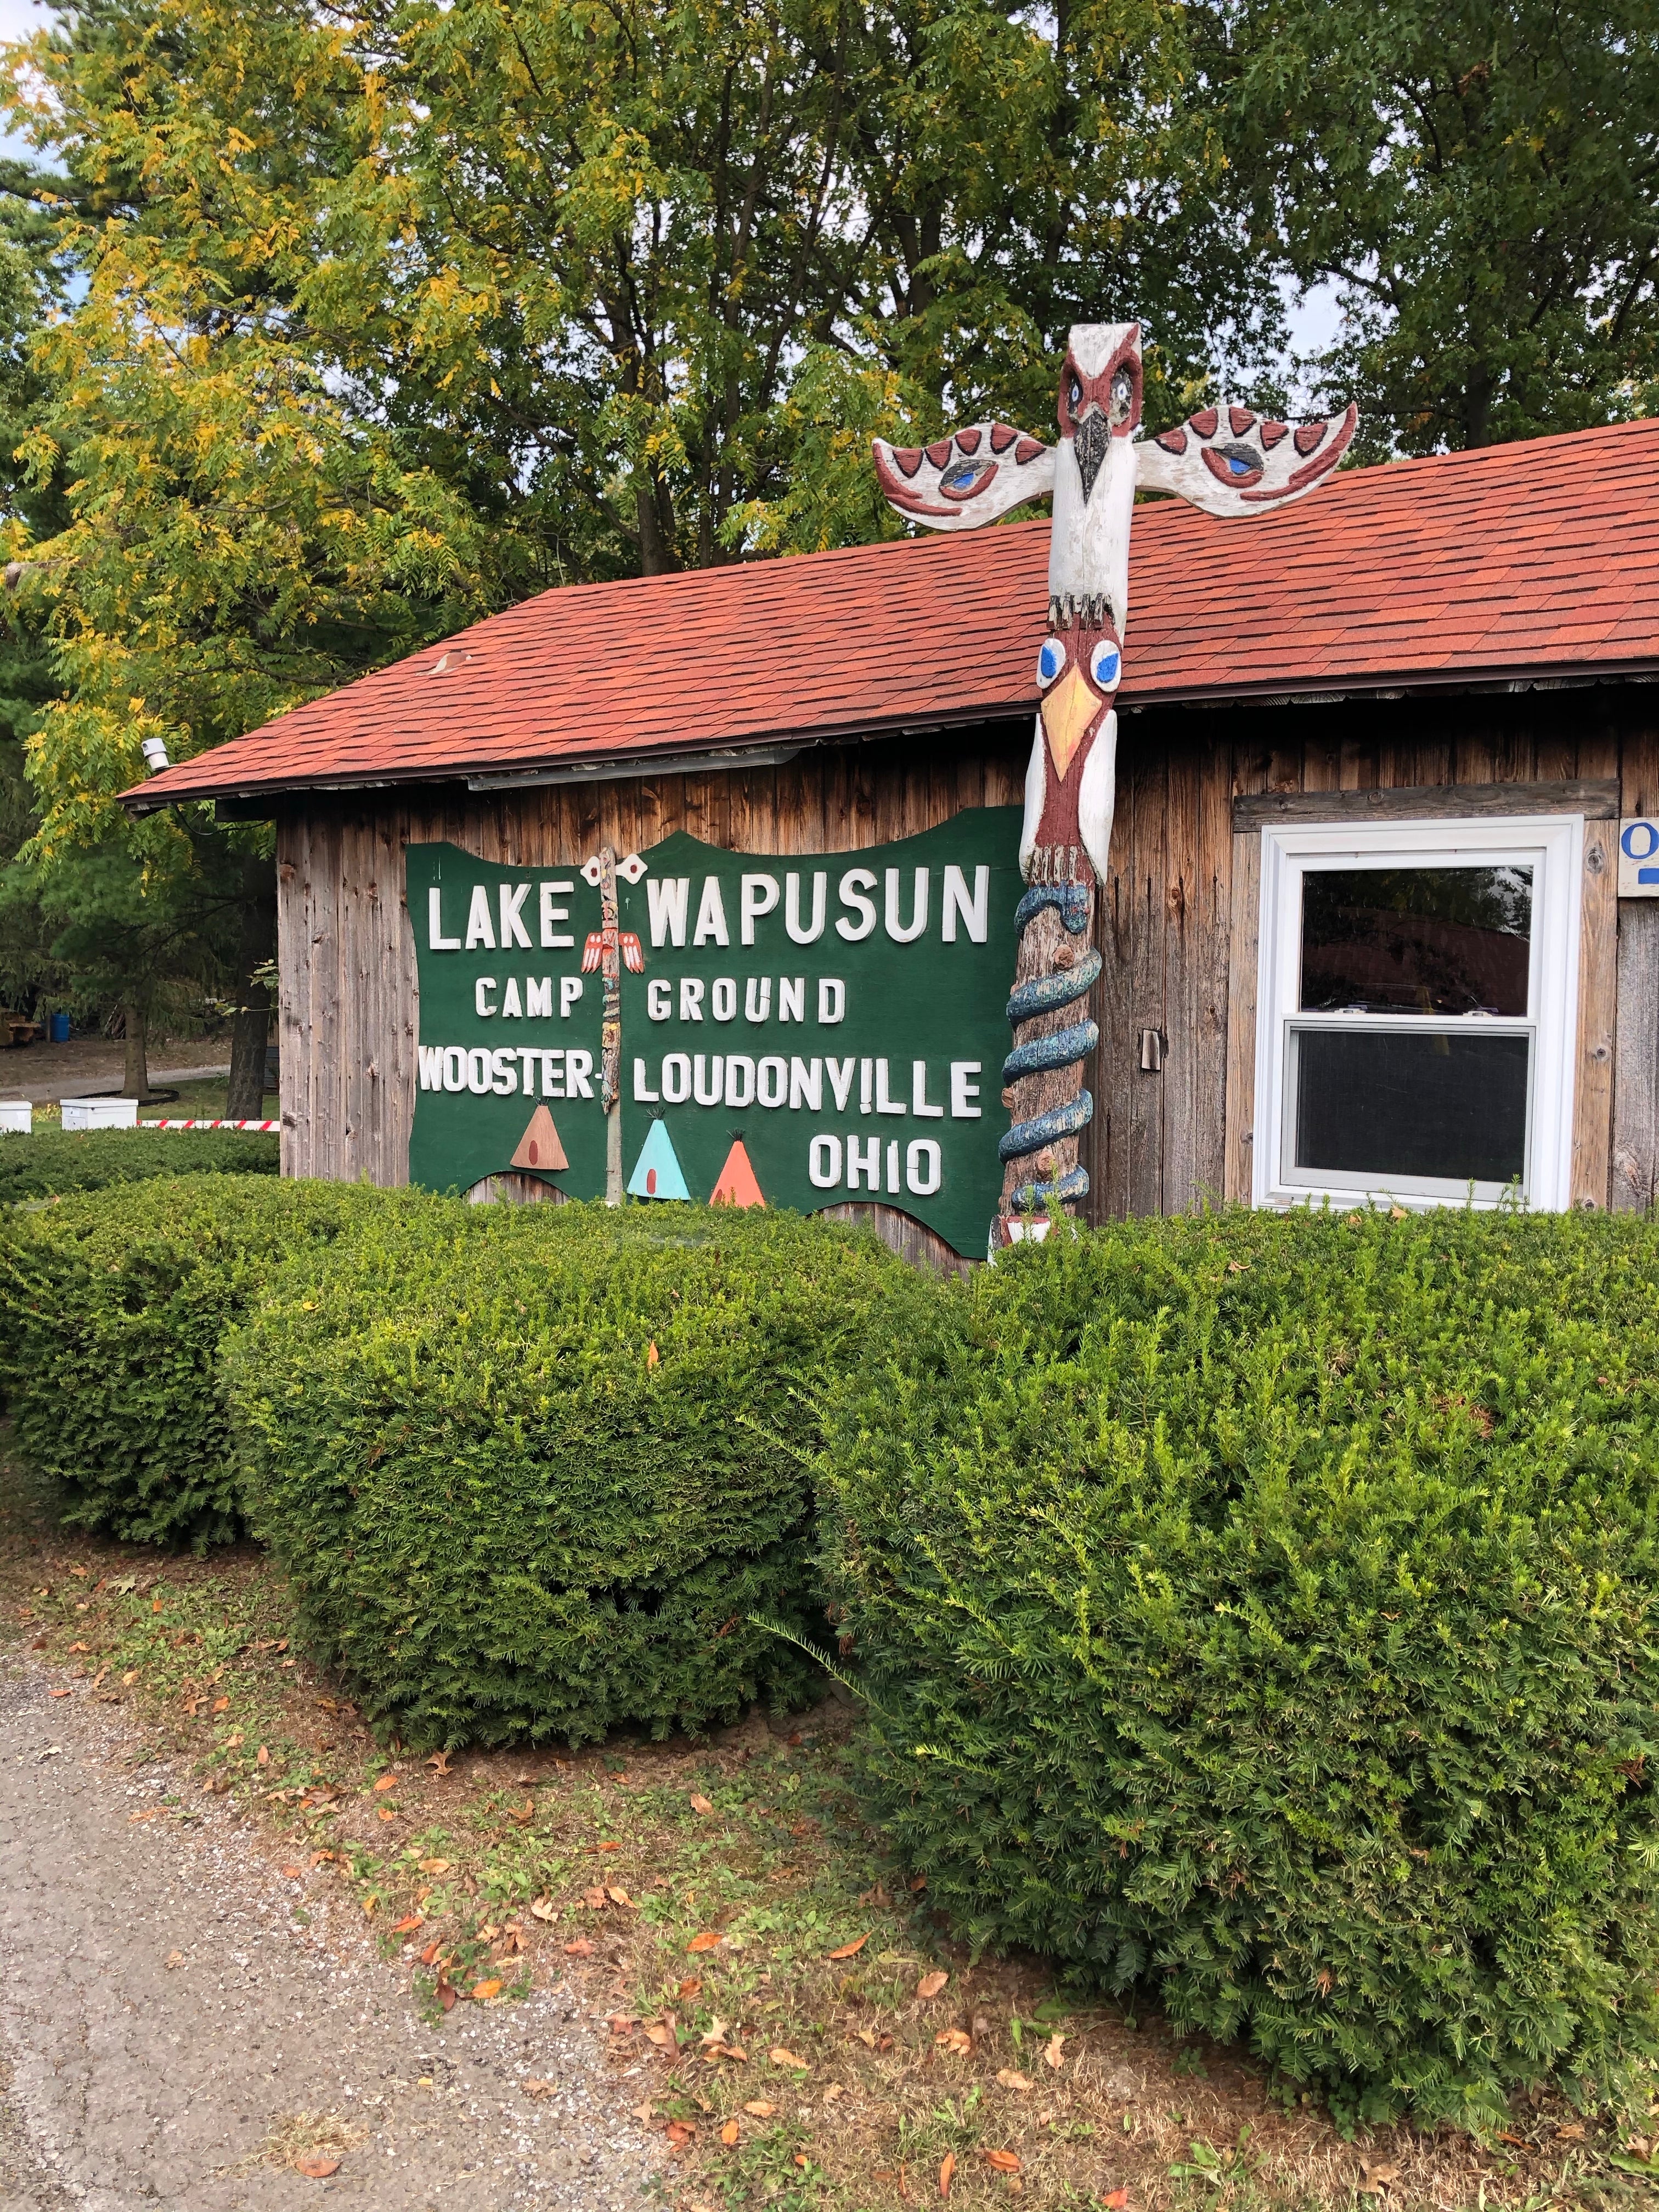 Camper submitted image from Lake Wapusun RV Resort - 4